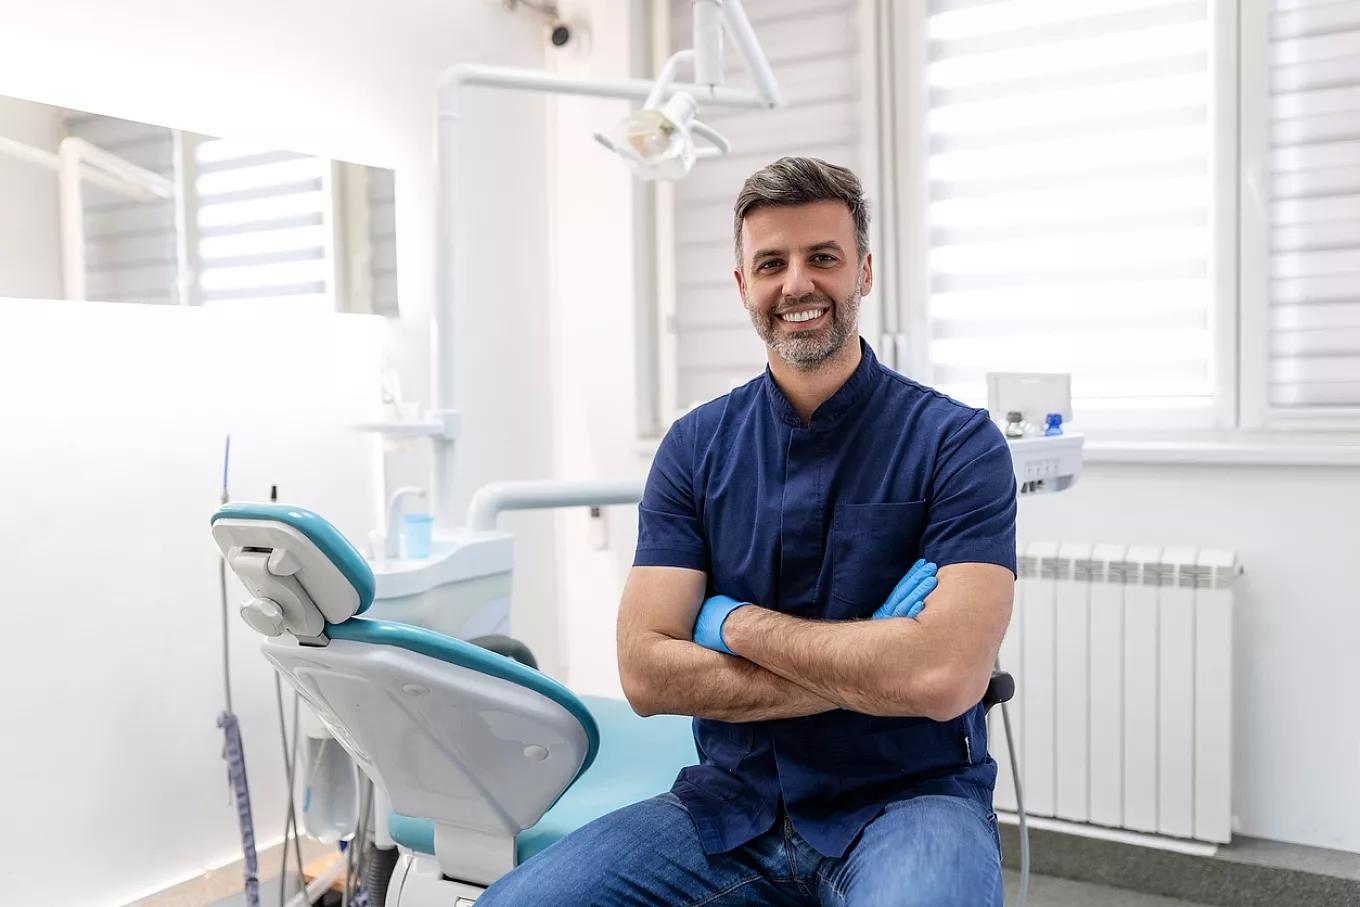 Orthodontist vs Dentist: What's the Difference?